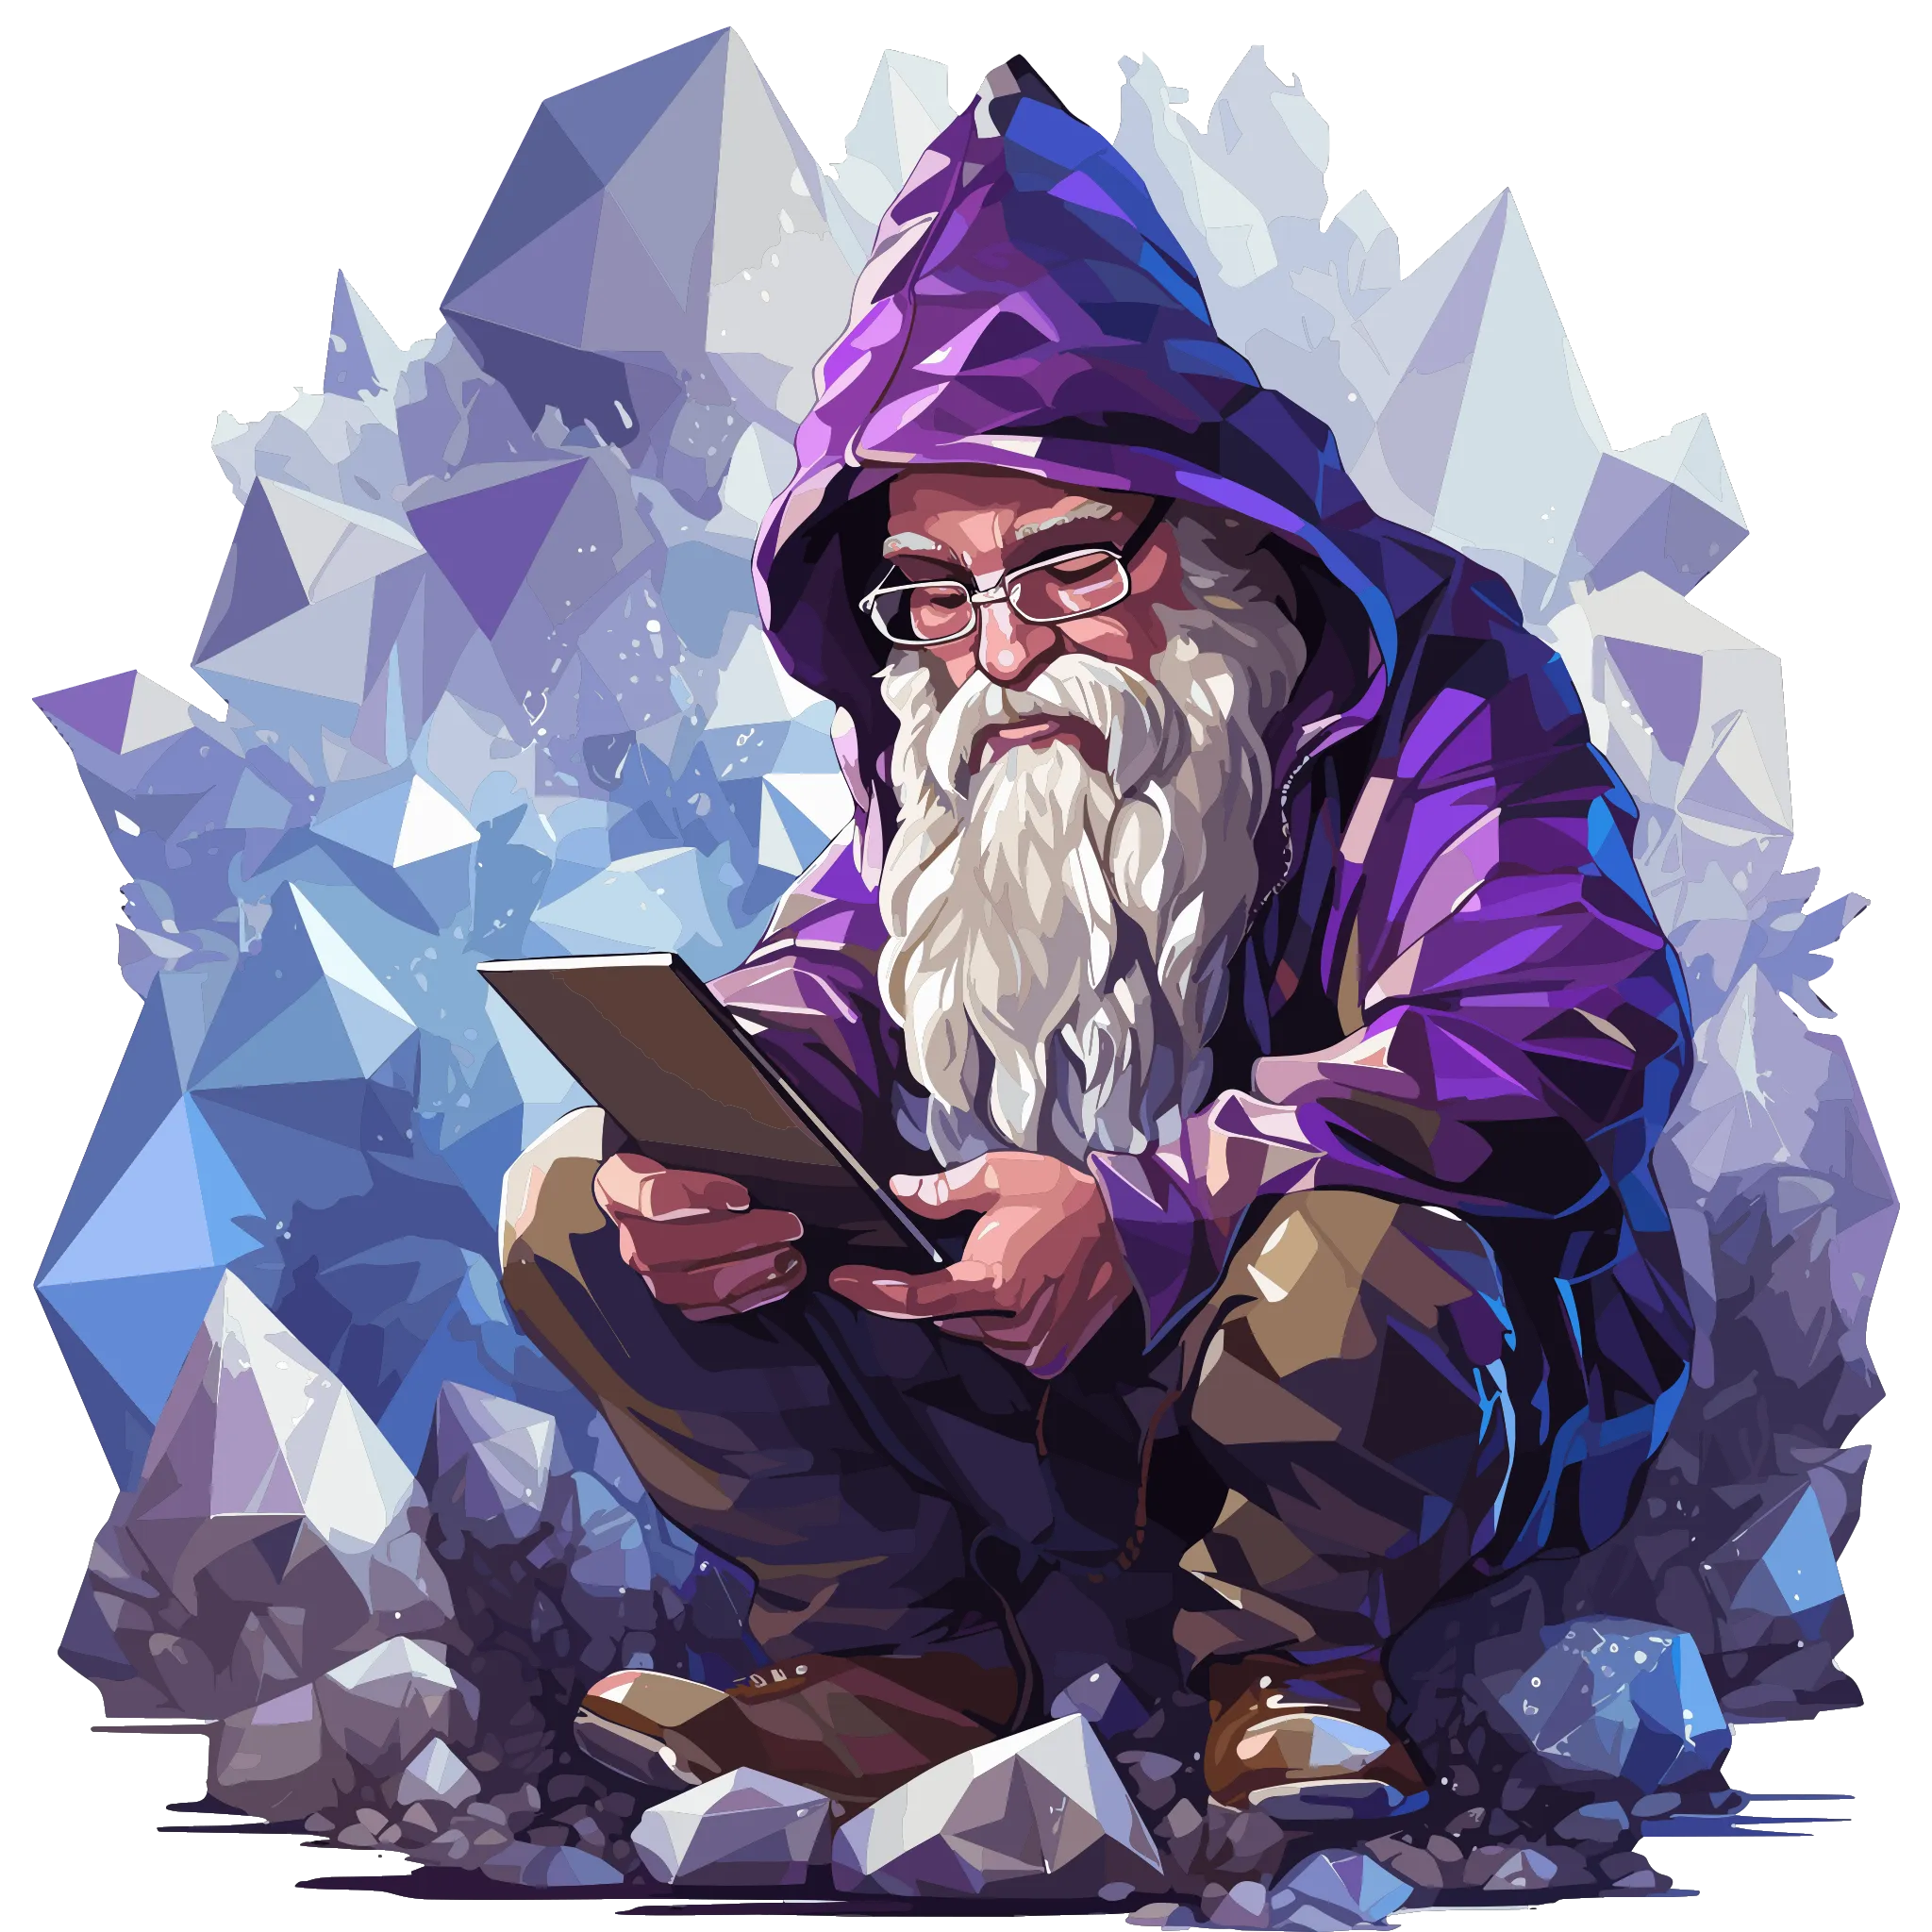 Amethron gnome reading something on a digital tablet in a diamond mine